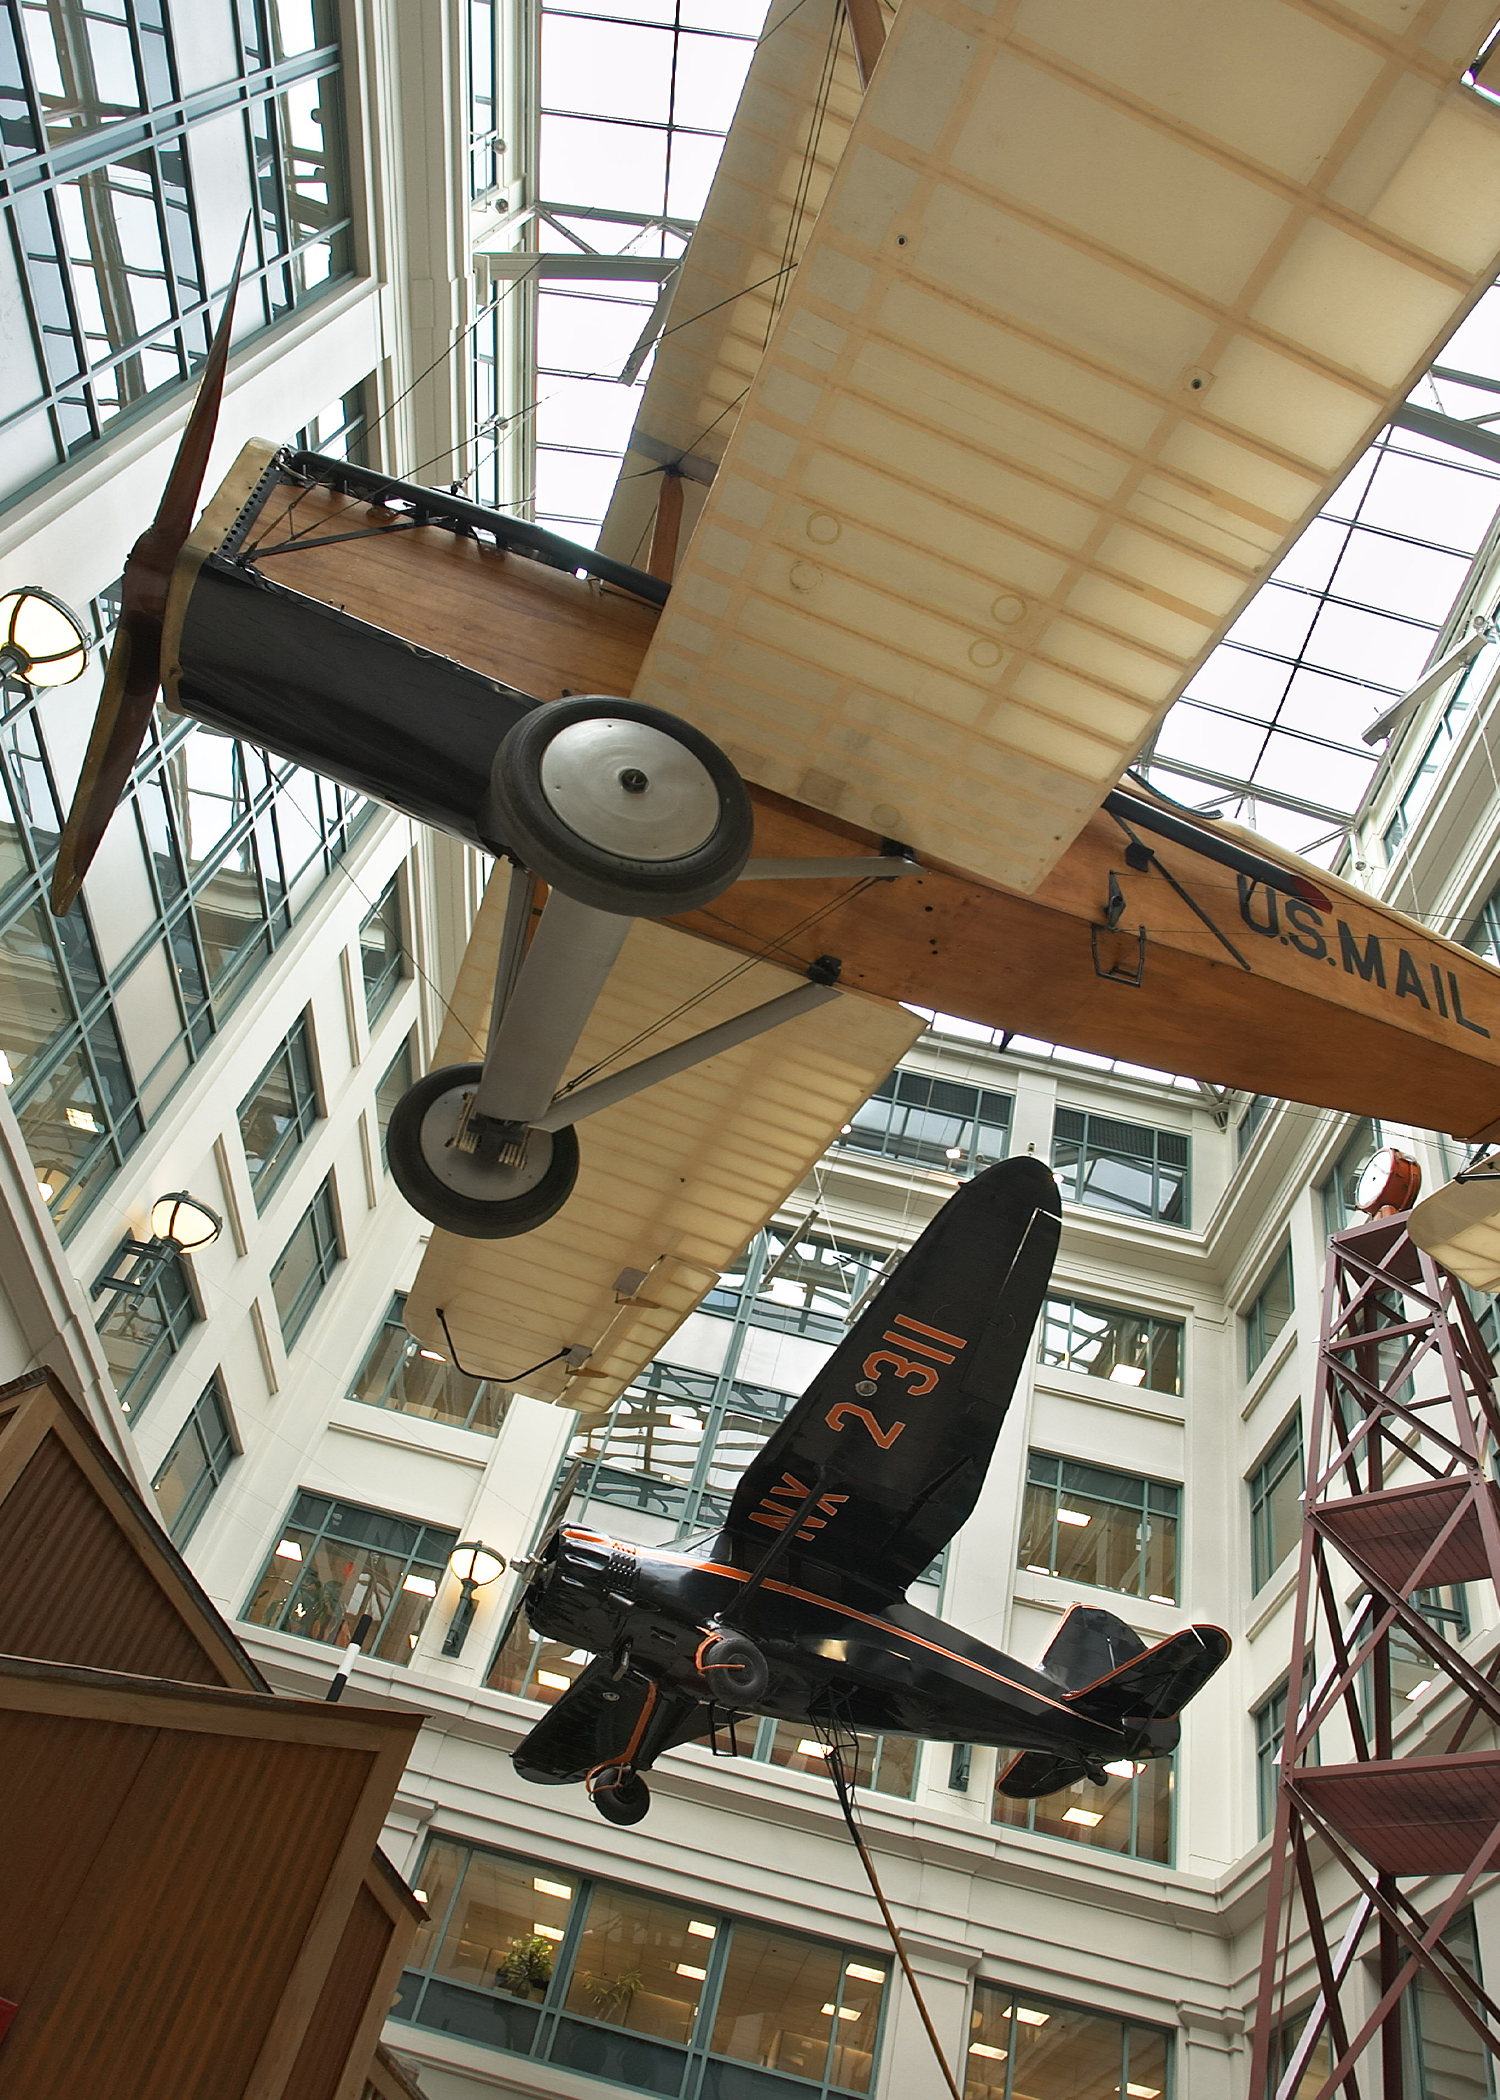 Mail Delivery Aircraft in the Postal Museum